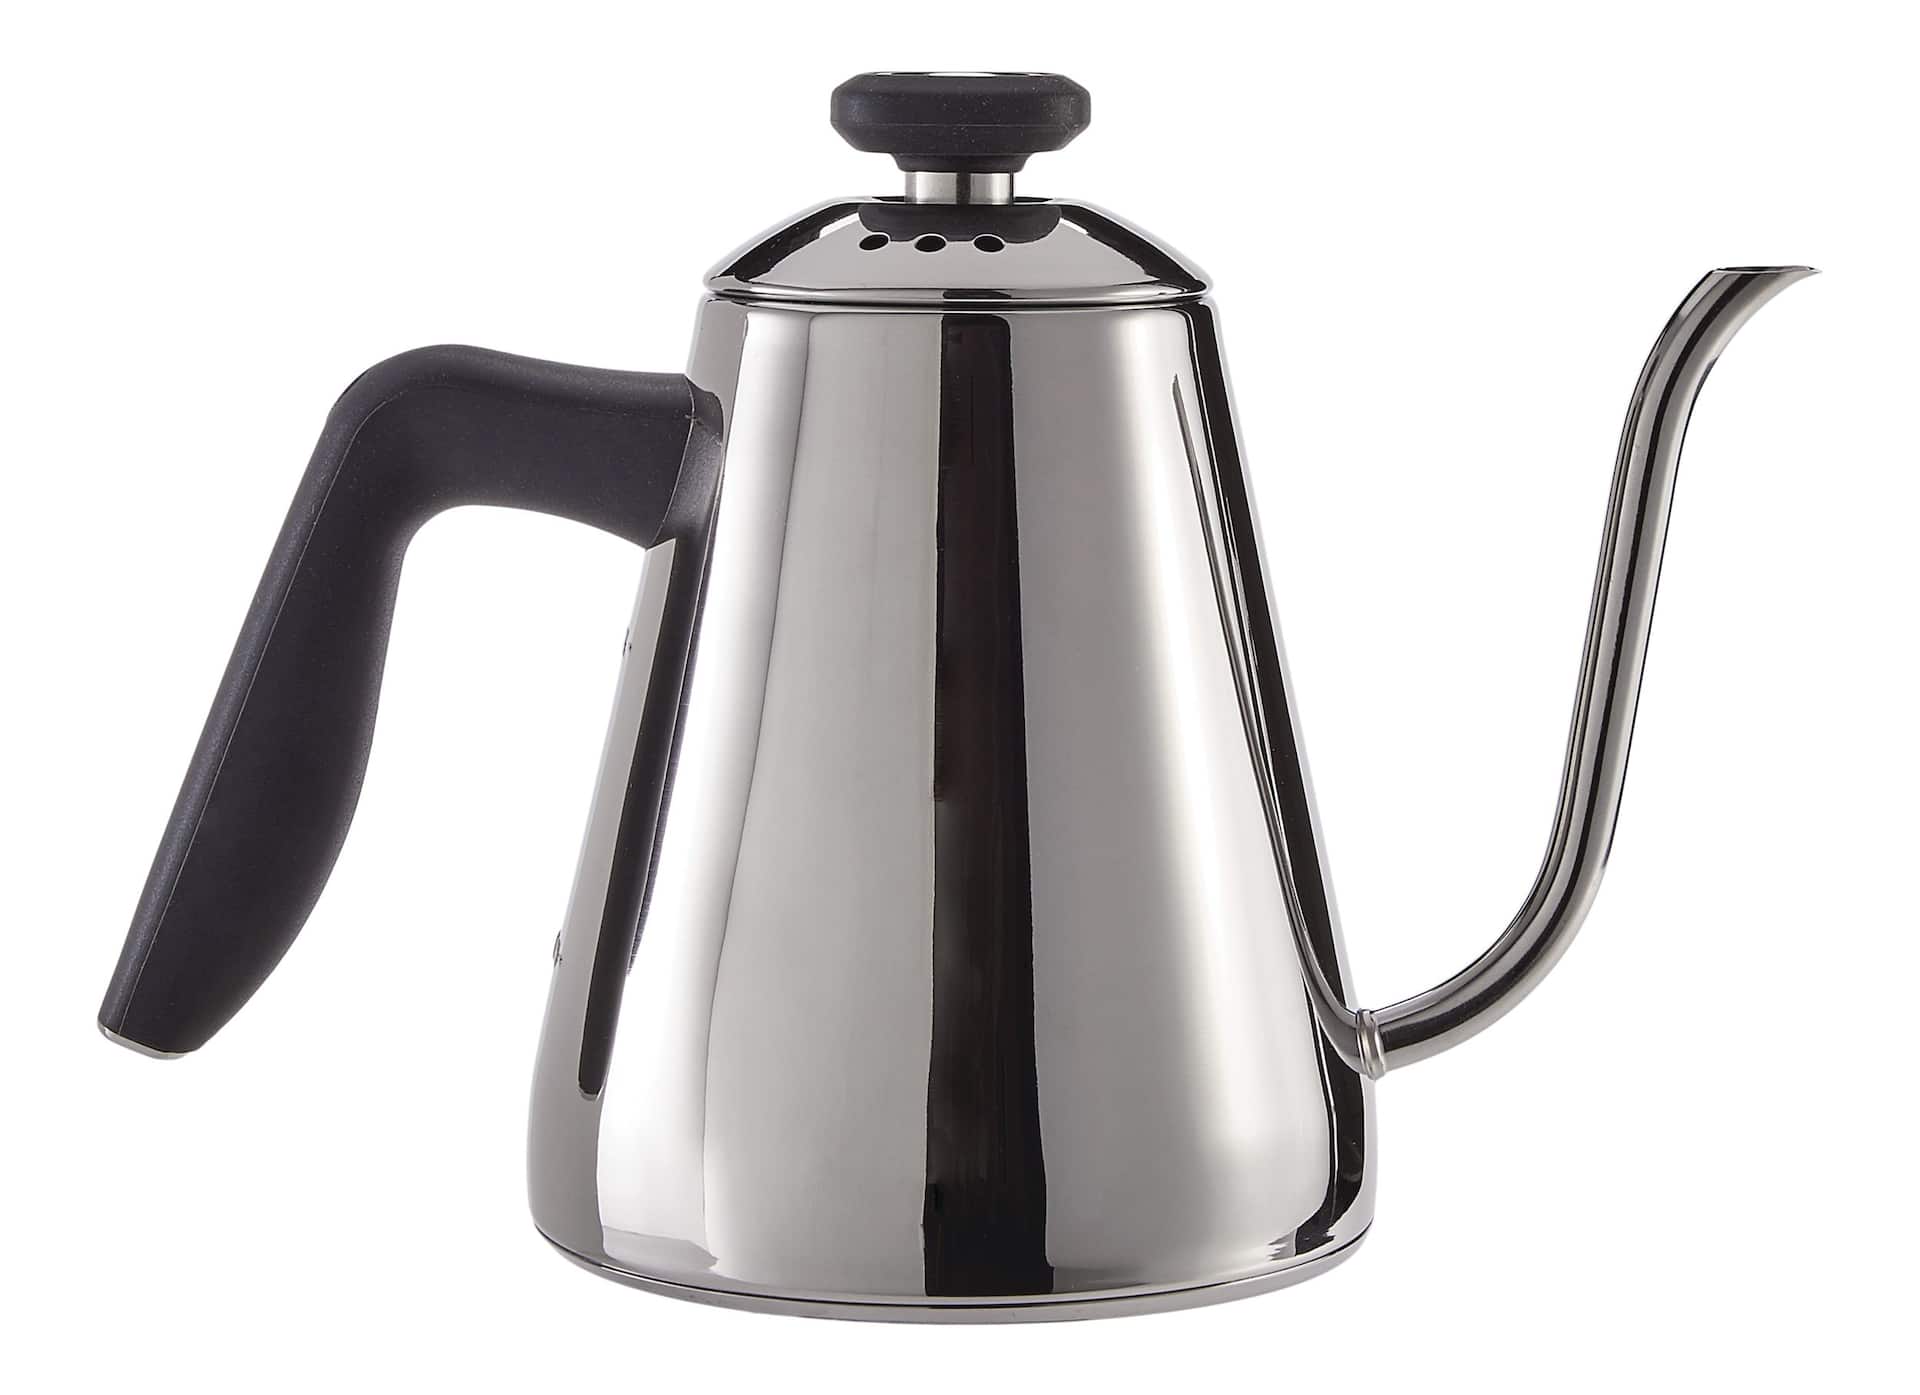 https://media-www.canadiantire.ca/product/living/kitchen/dining-and-entertaining/1424999/paderno-pour-over-kettle-bfa57410-1185-4db4-a65f-ac4413cce5ac-jpgrendition.jpg